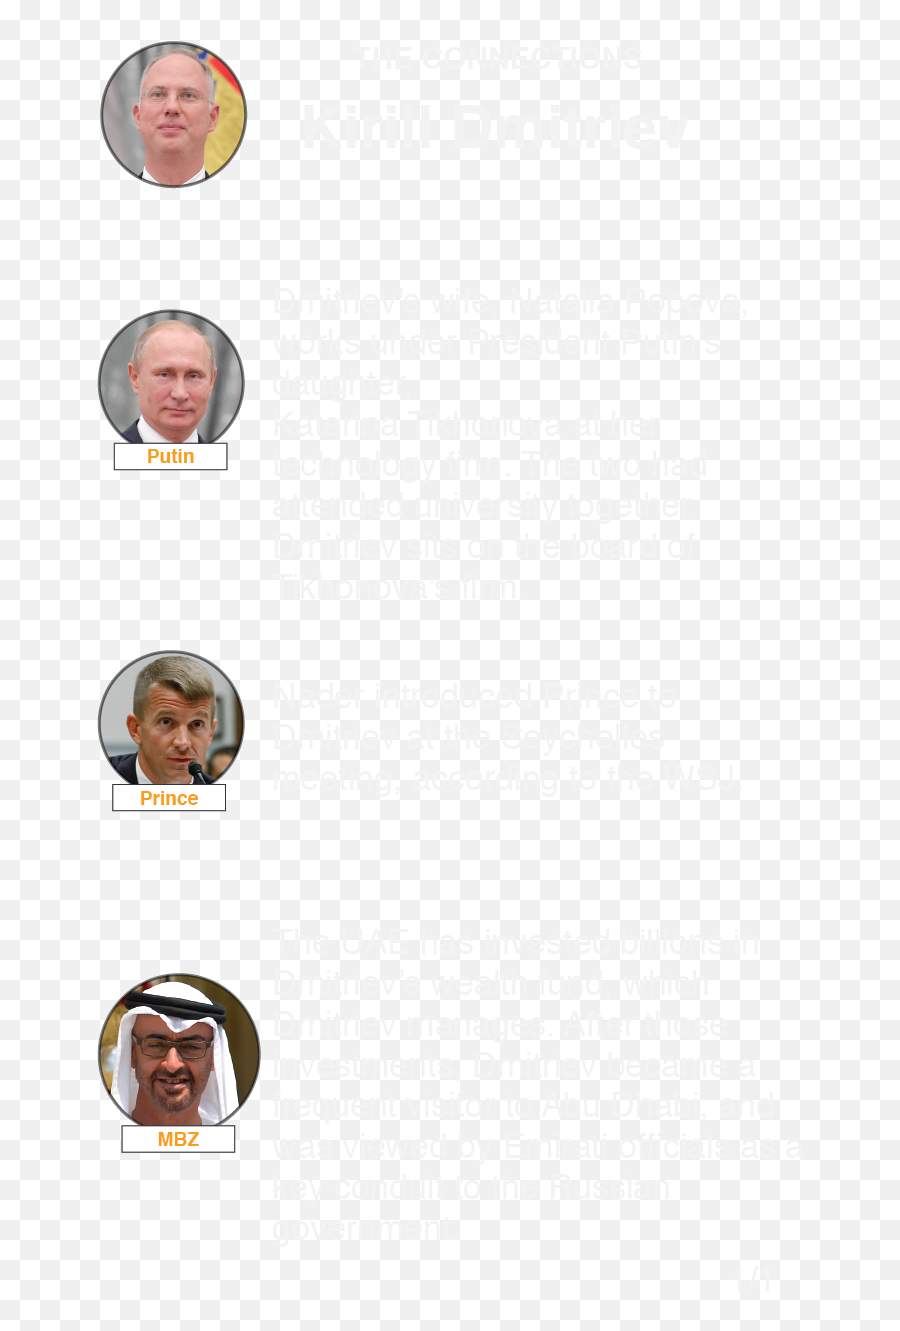 Muelleru0027s Web The Uae - Trump Connection Document Png,Putin Face Png